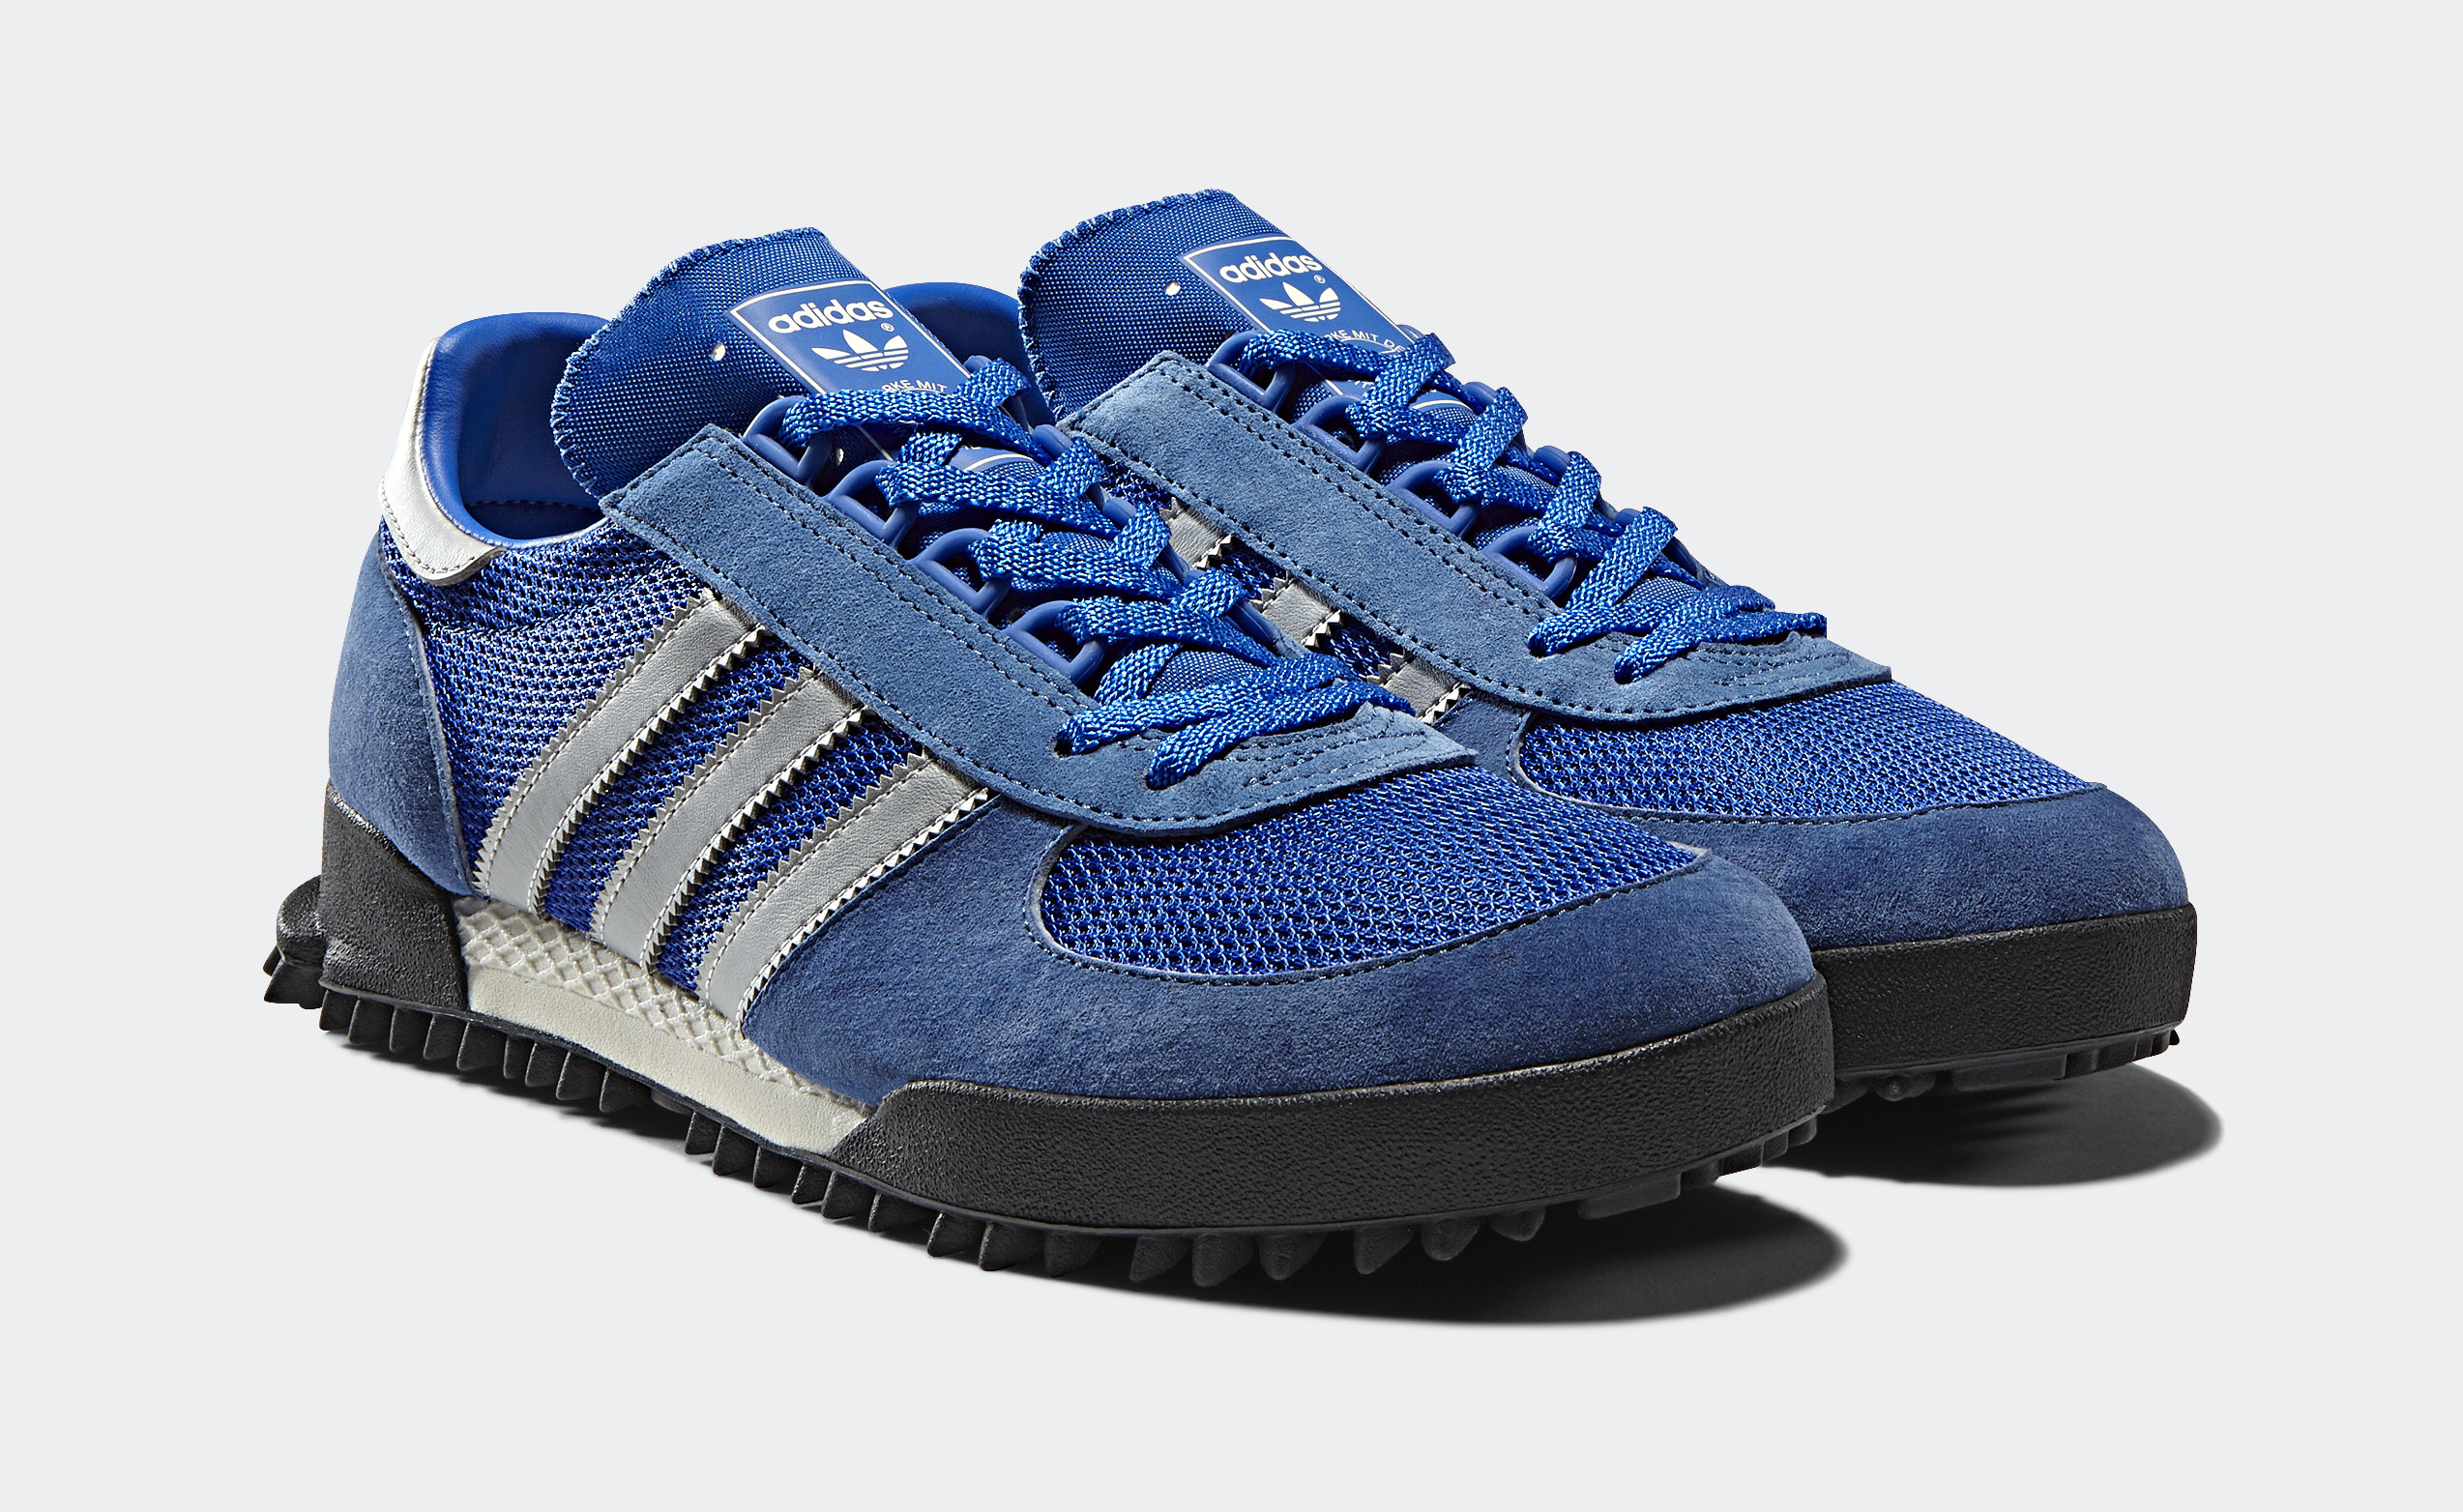 Casco maleta Charlotte Bronte Adidas is Bringing Back a Classic to Kick Off the New Year | Complex